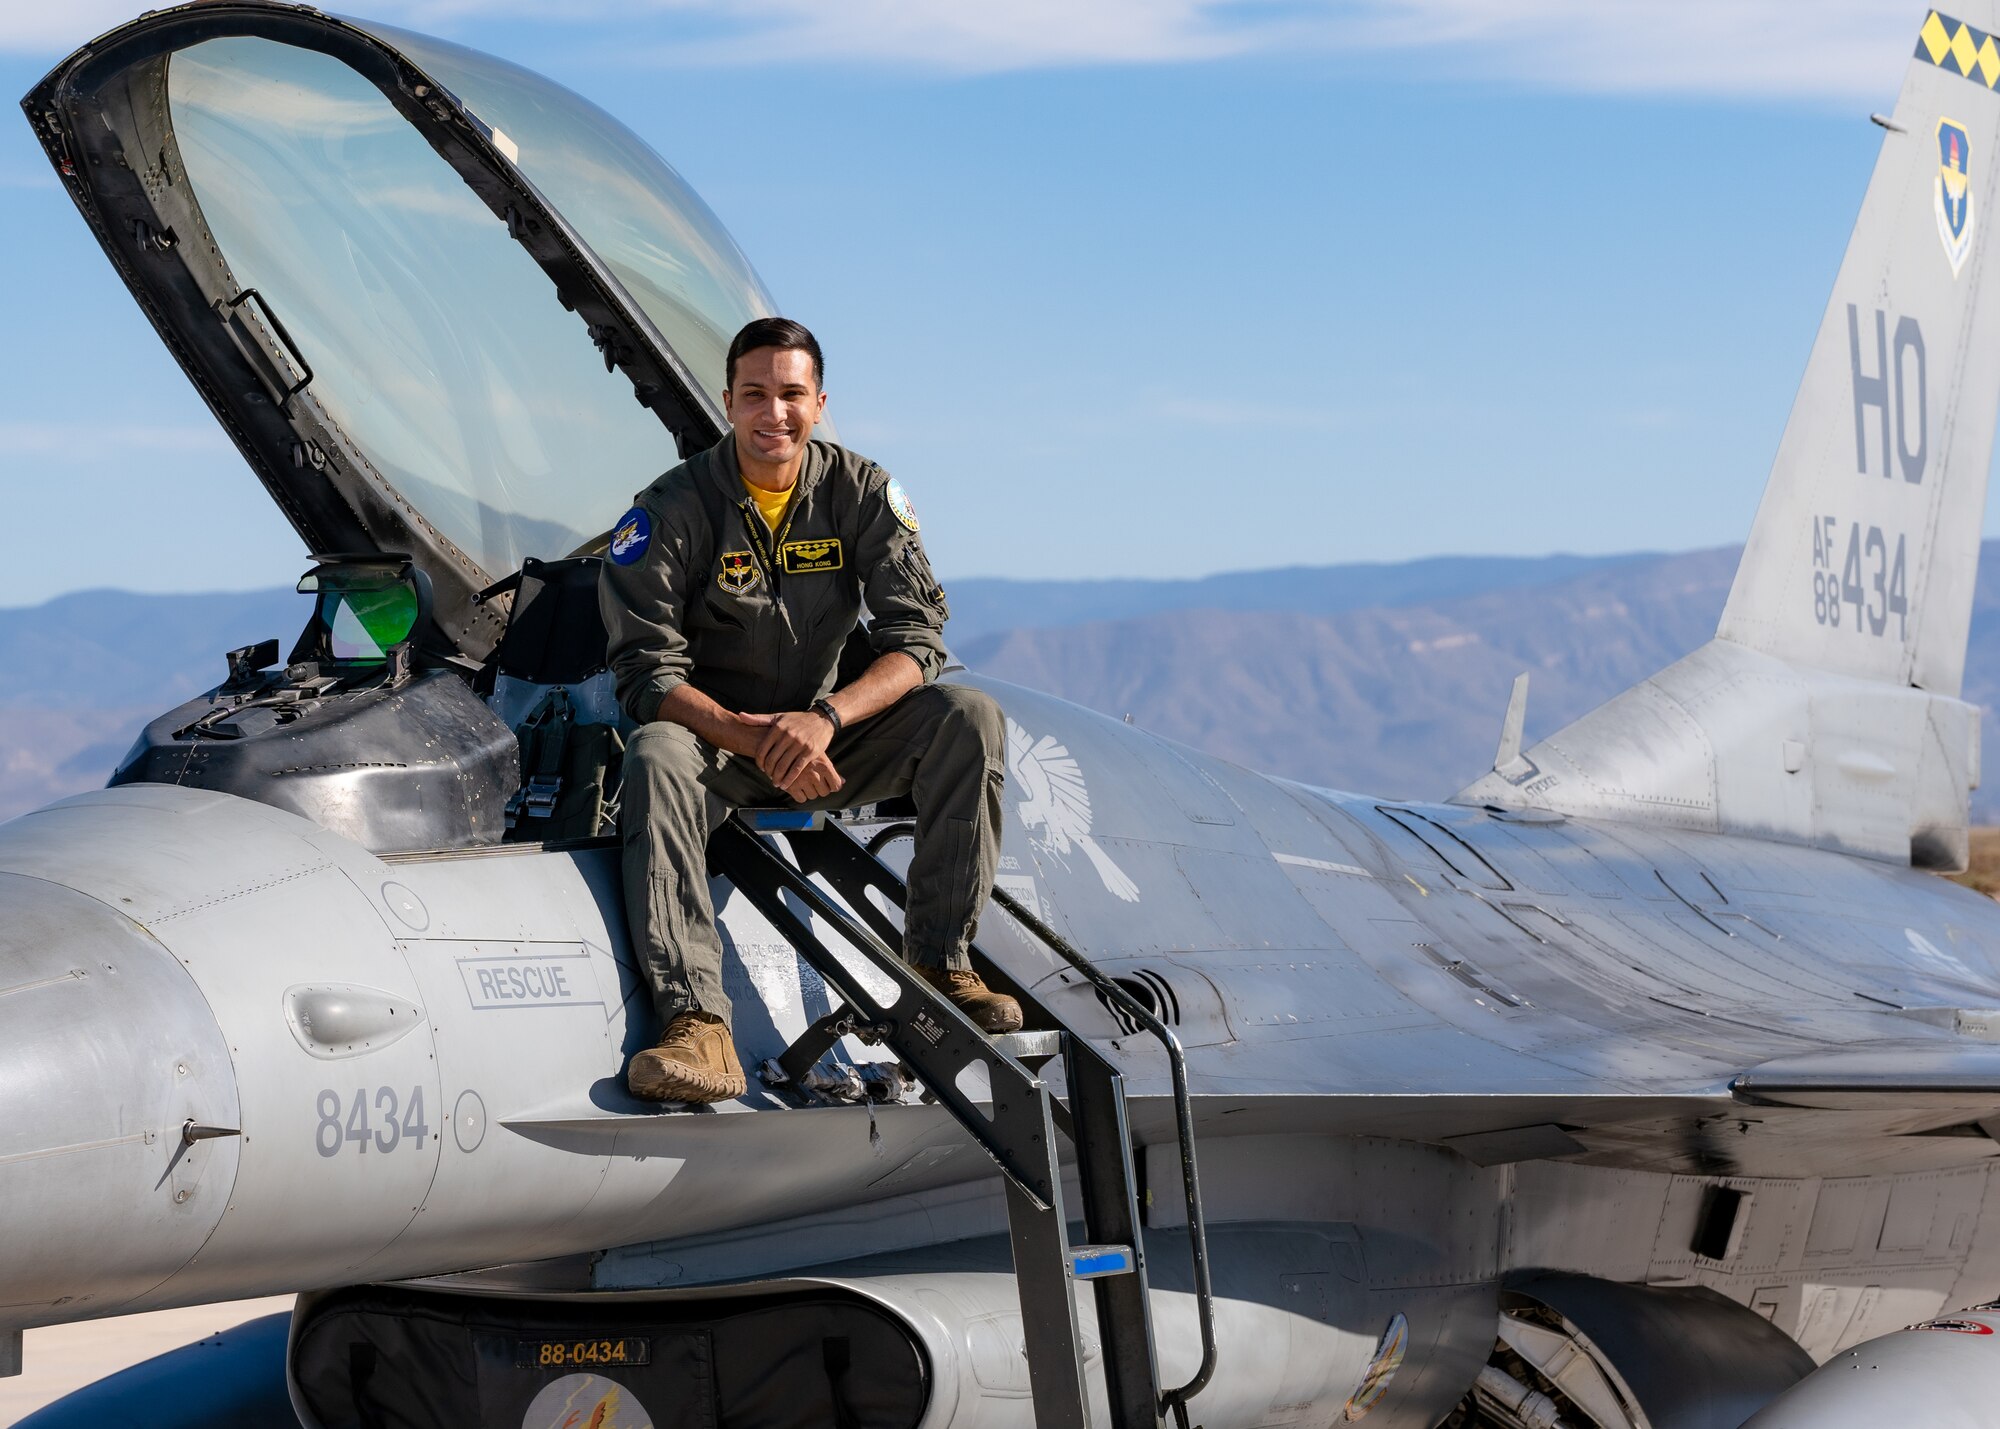 A plot in a green flight suit sits on top of a silver F-16 Viper aircraft in front of a blue sky.